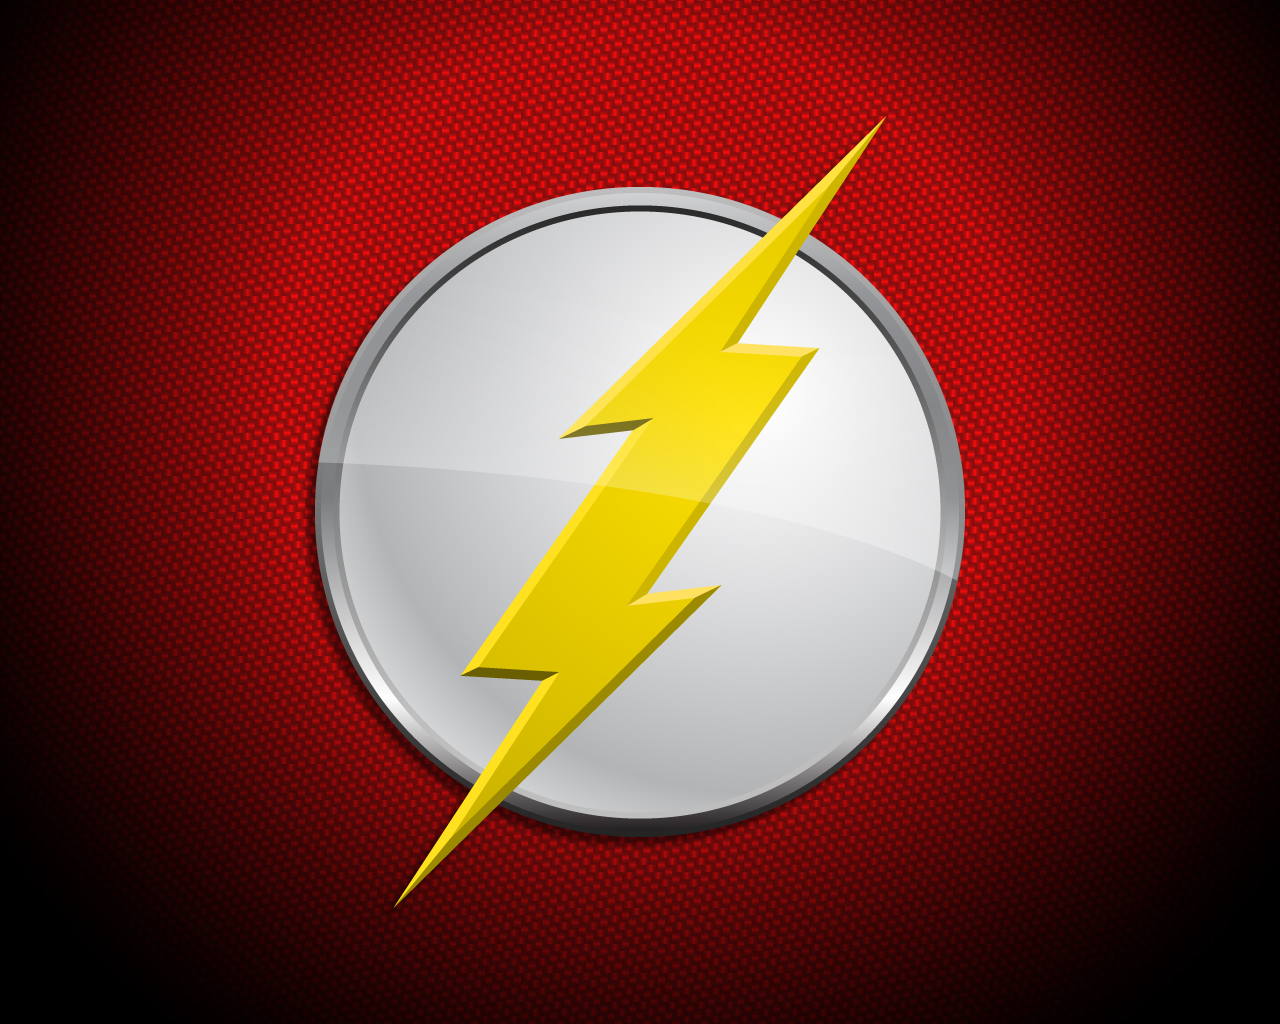 The Flash Logo Wallpaper Images Pictures   Becuo